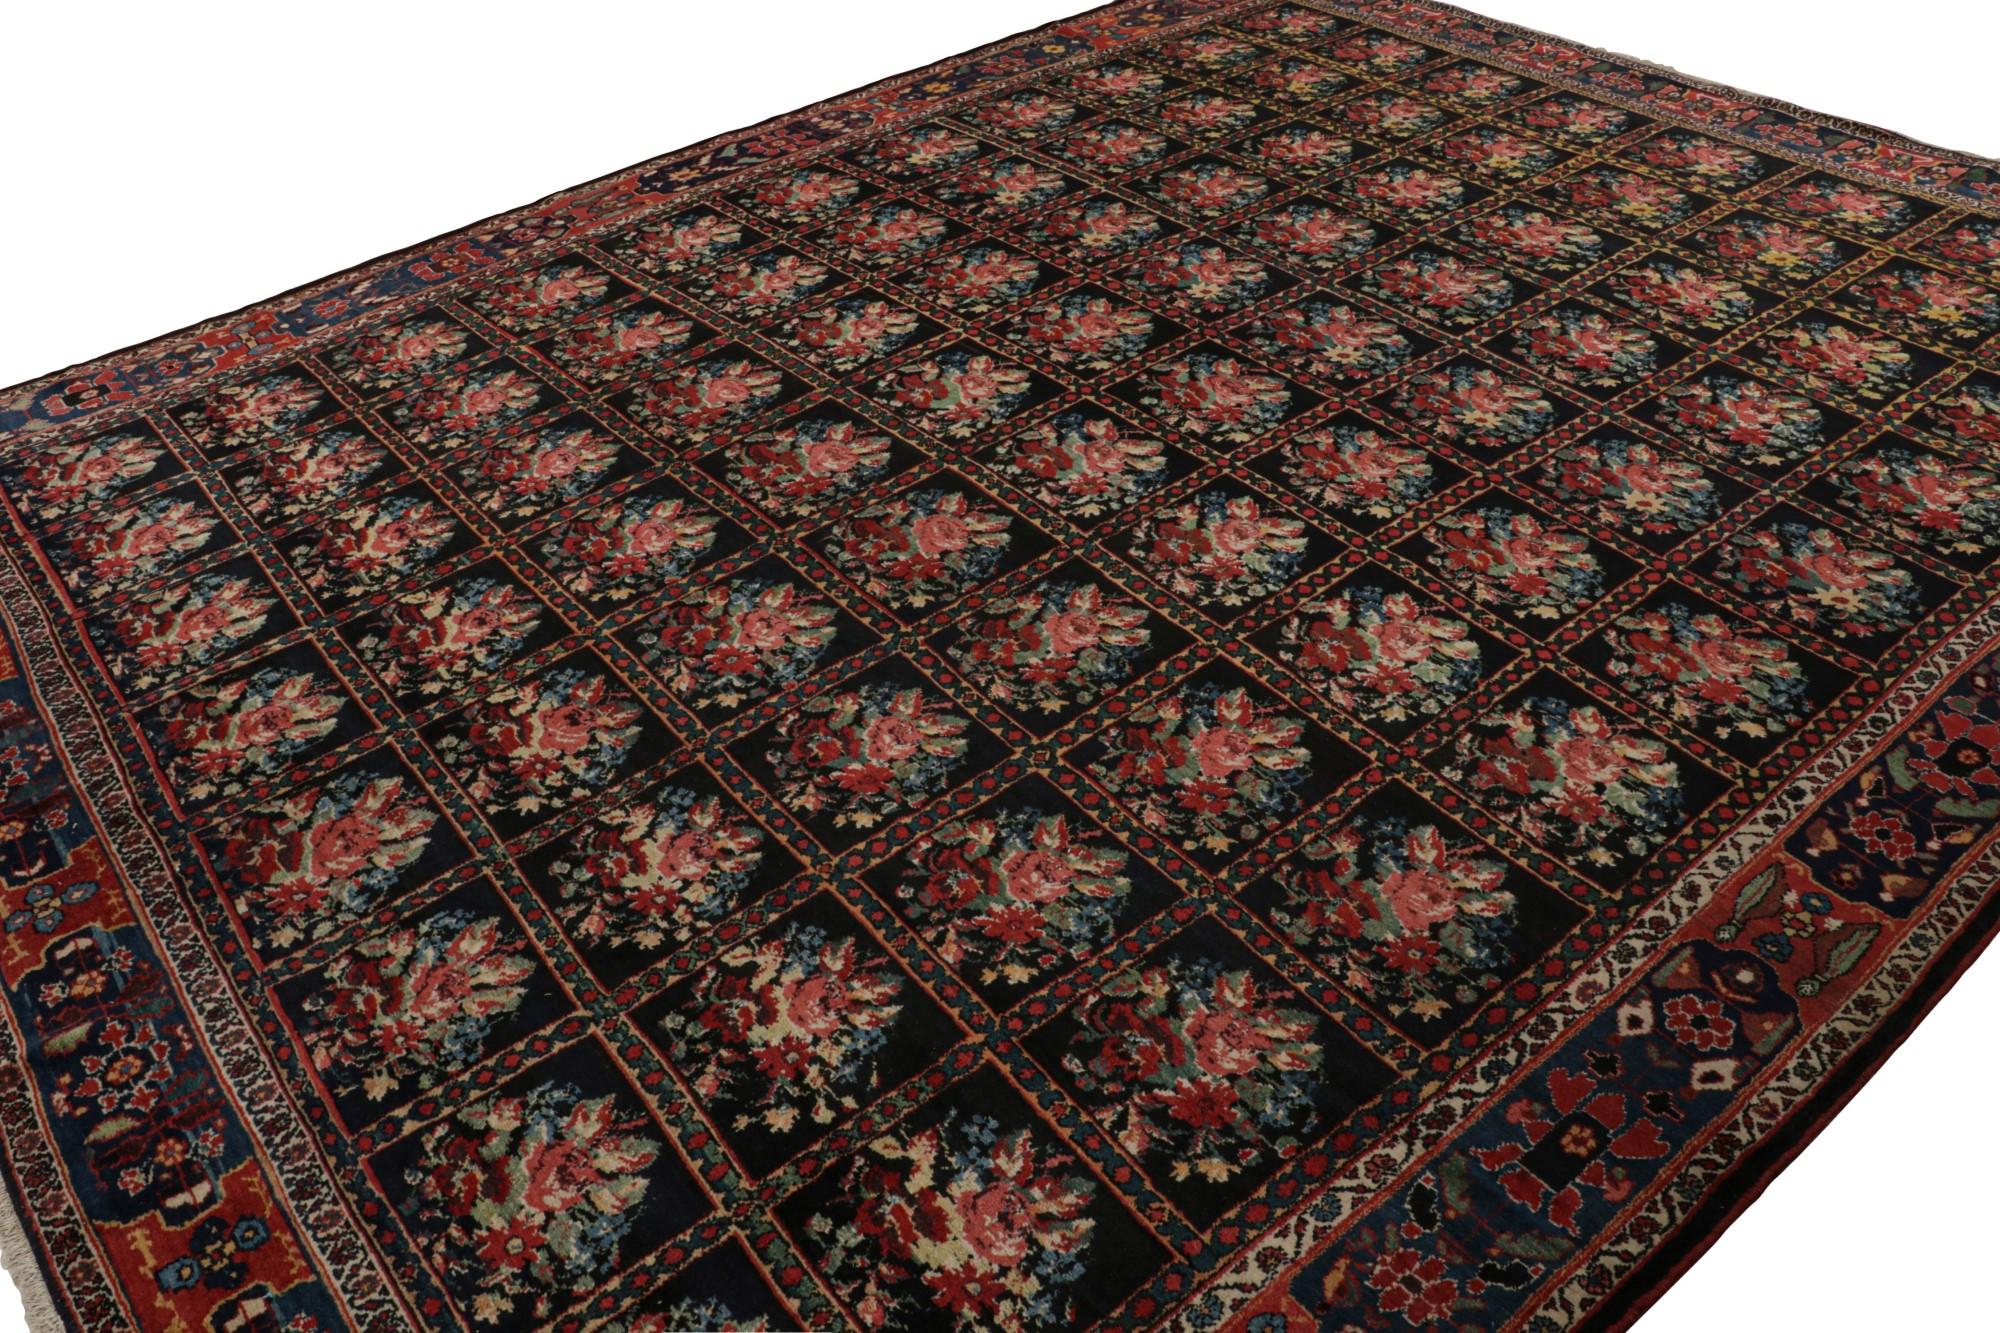 Hand-knotted with wool, originating circa 1920-1930, this 12x15 antique Persian Bakhtiari rug enjoys a rich black field with brown undertones, especially present red and gold in the many deep, saturated hues that depict its floral patterns. 

On the